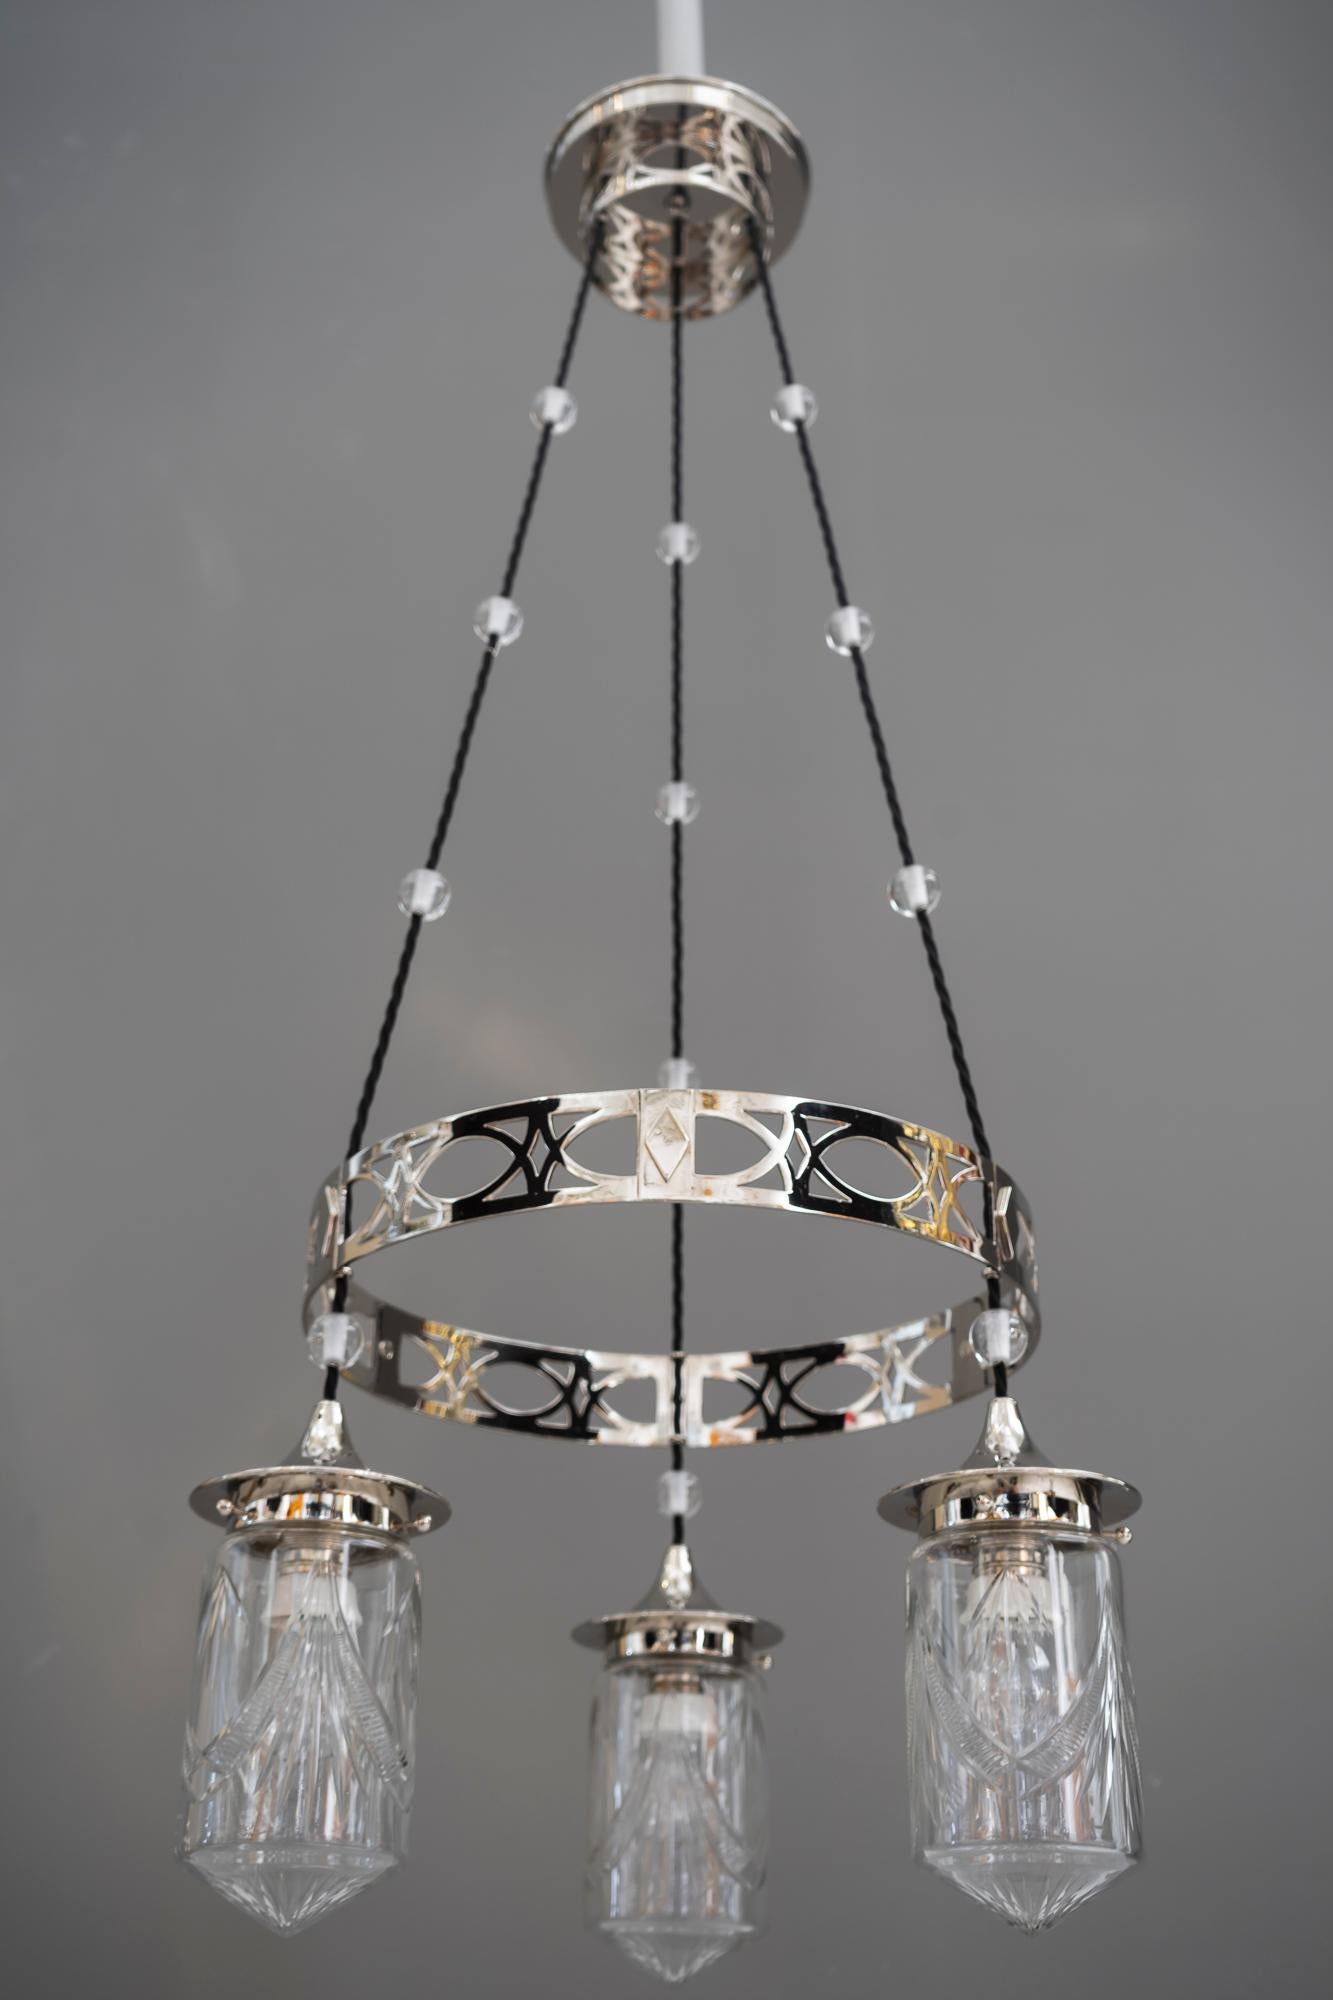 Nickel-Plated Art Deco Chandelier with Original Cut-Glasses, circa 1920s For Sale 5